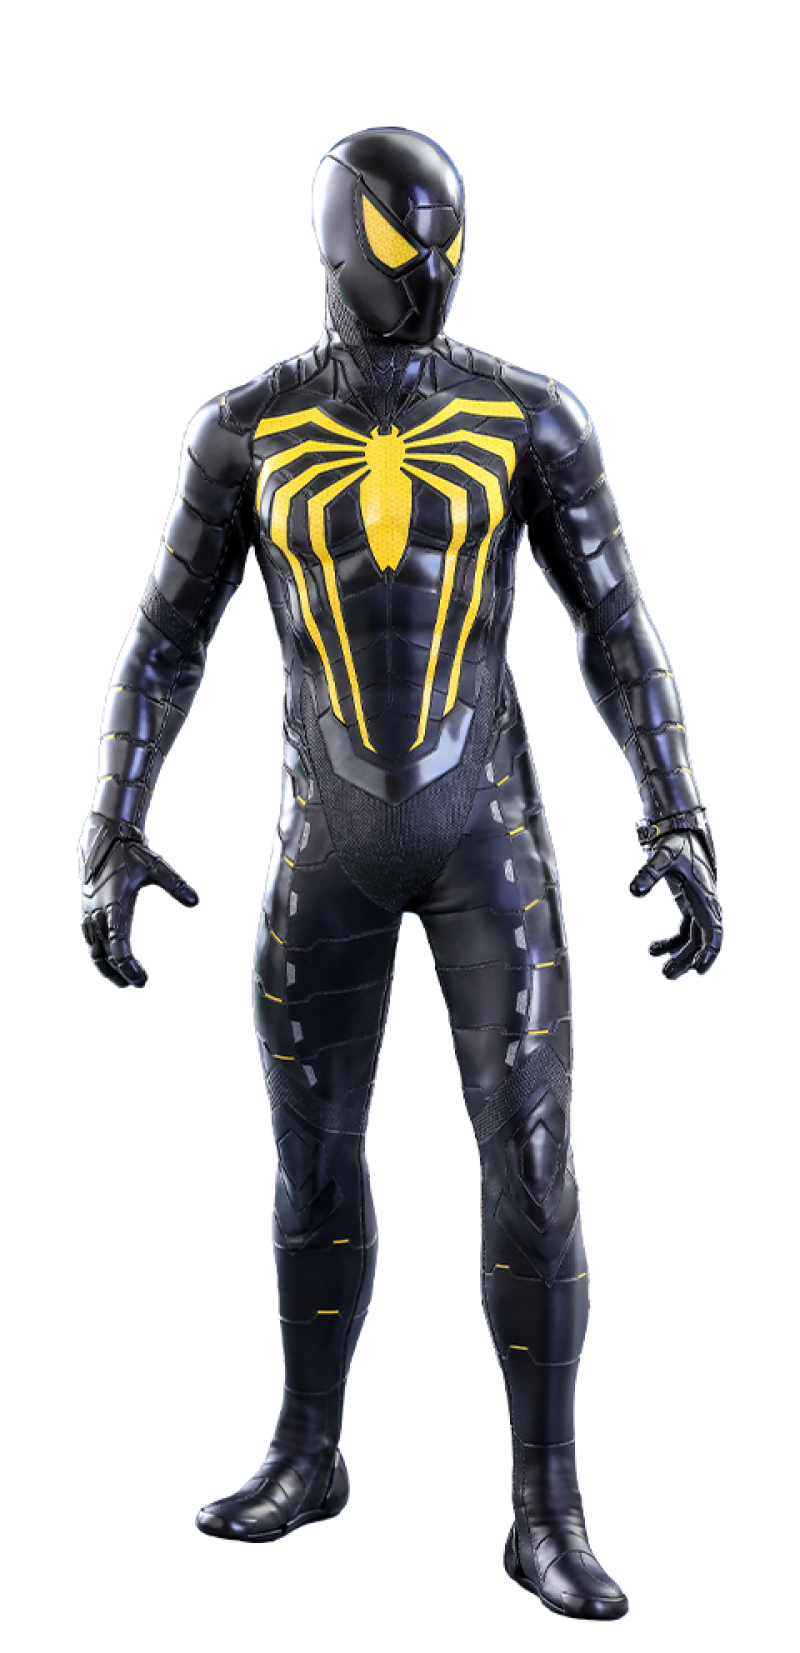 Spider-Man (Anti-Ock Suit) DELUXE Sixth Scale Figure VGM45